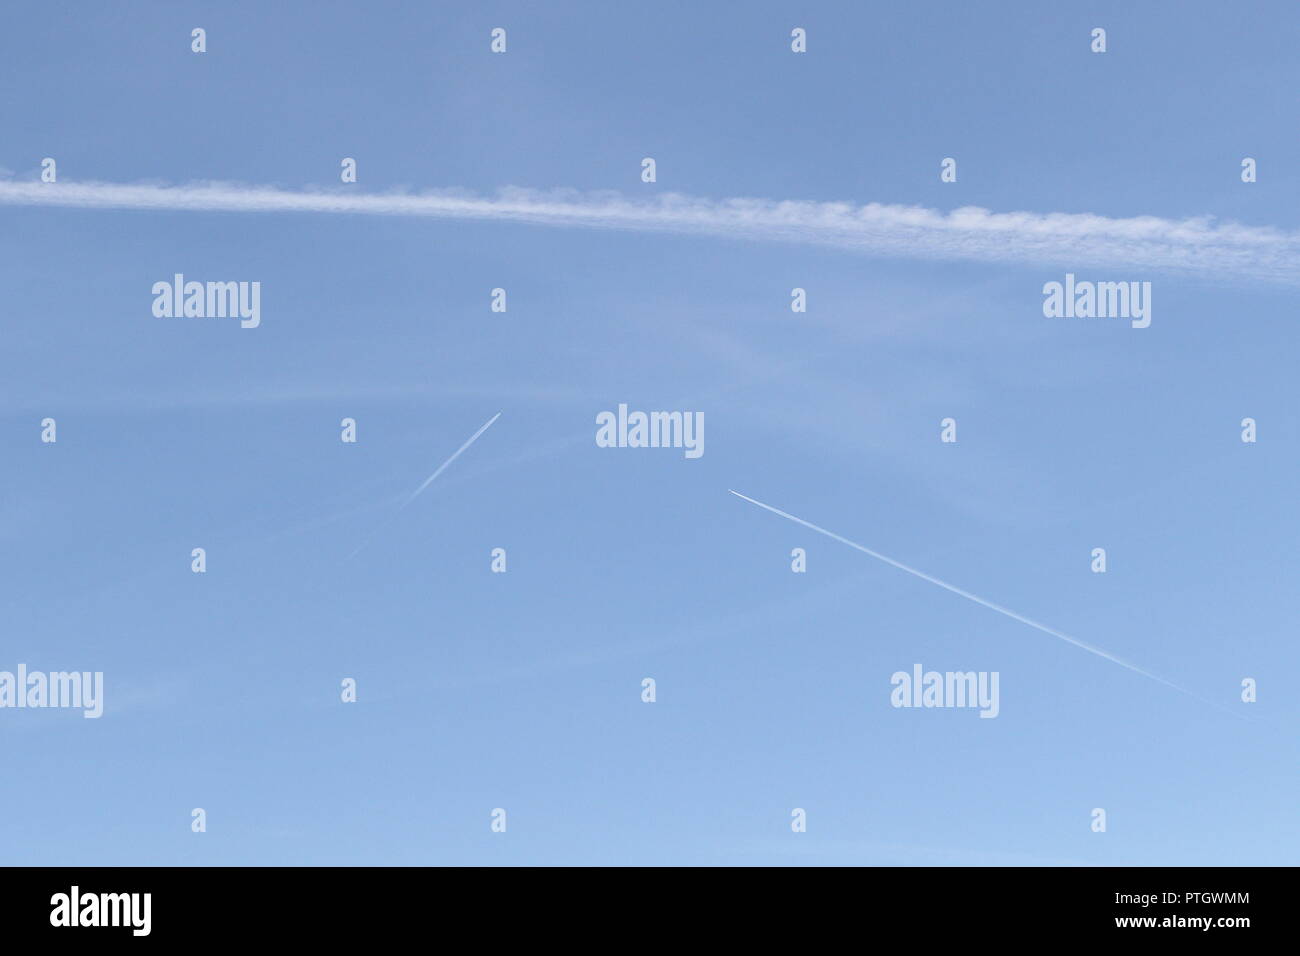 Collision course. Jet fuel vapors on the blue sky background Stock Photo